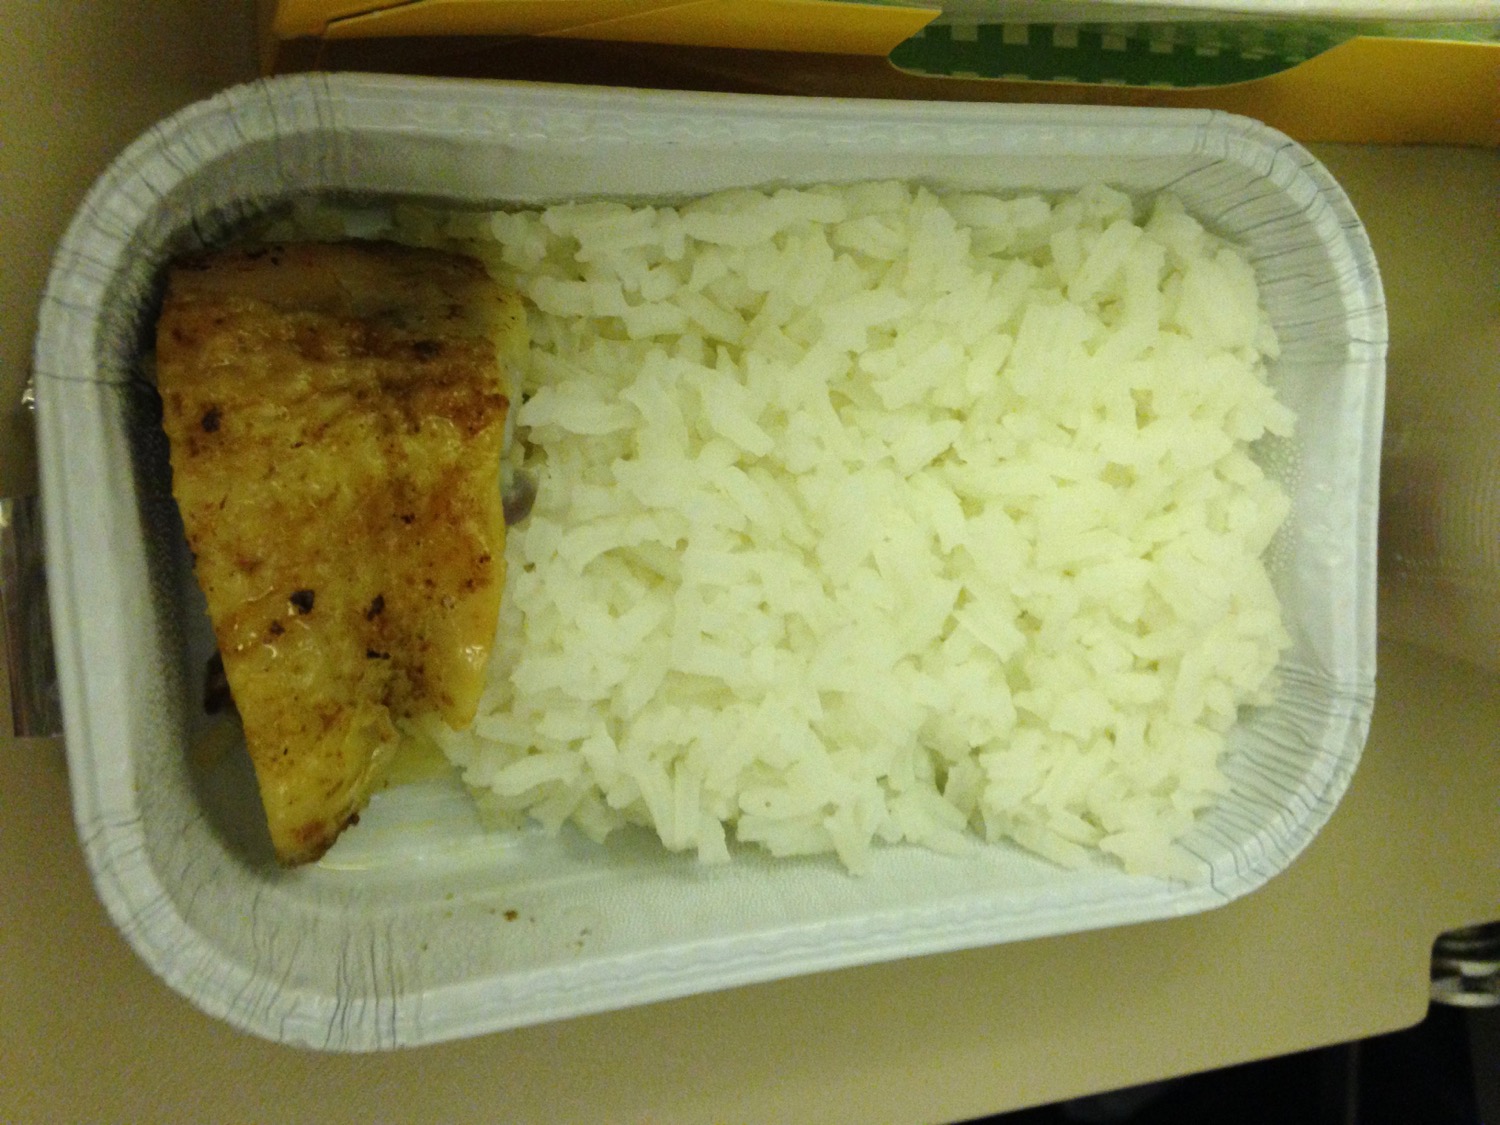 a plate of food with a piece of meat and rice